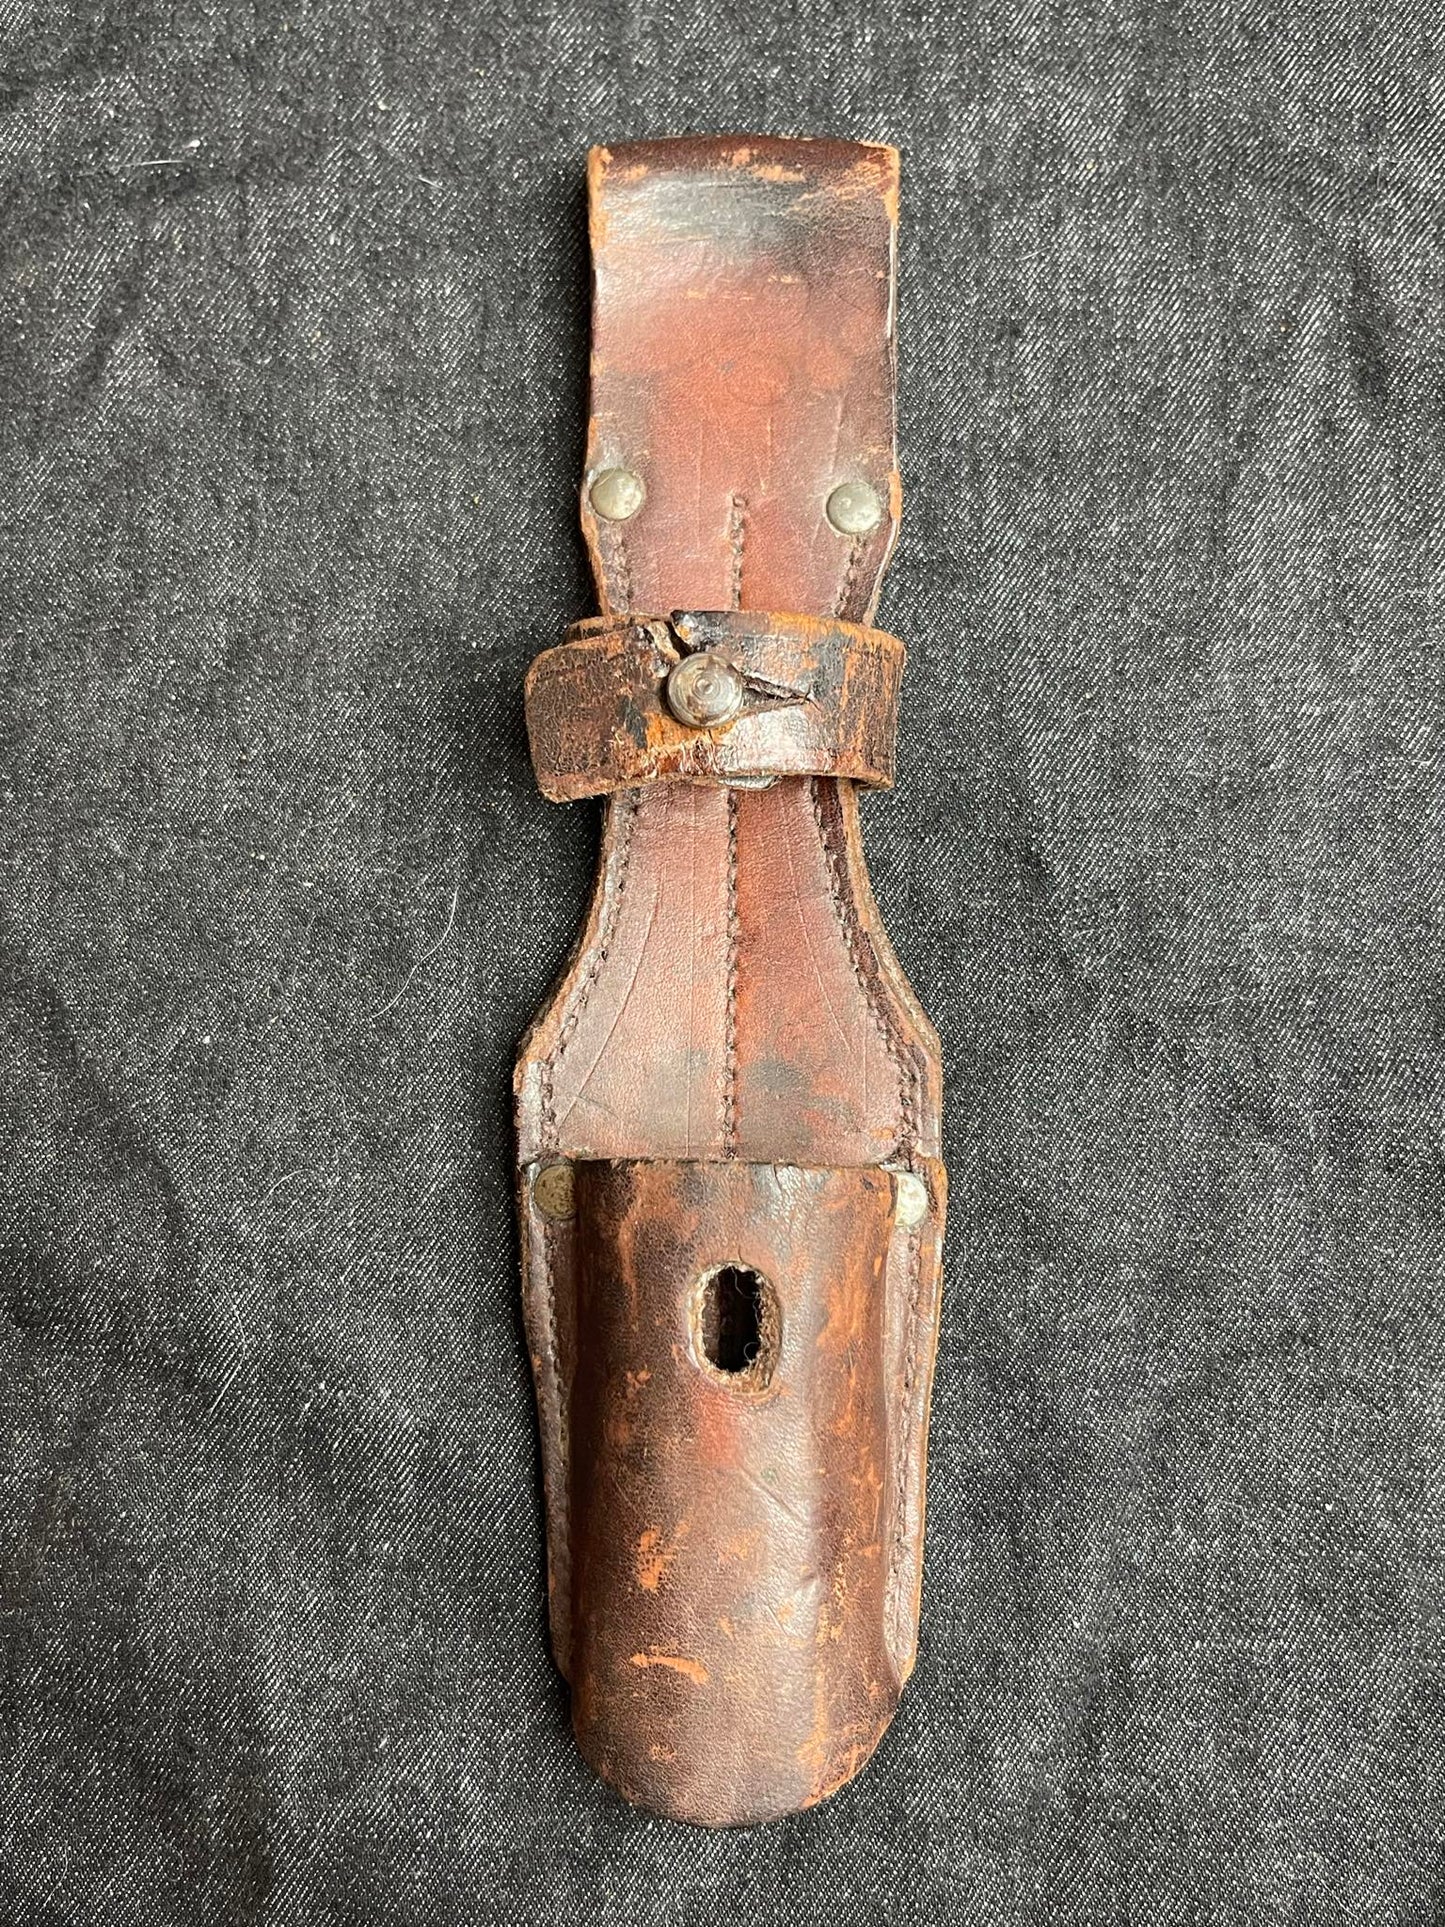 GERMAN WW2 LUFTWAFFE S84/98 III PATTERN COMBAT BAYONET BROWN LEATHER FROG LATE VARIANT